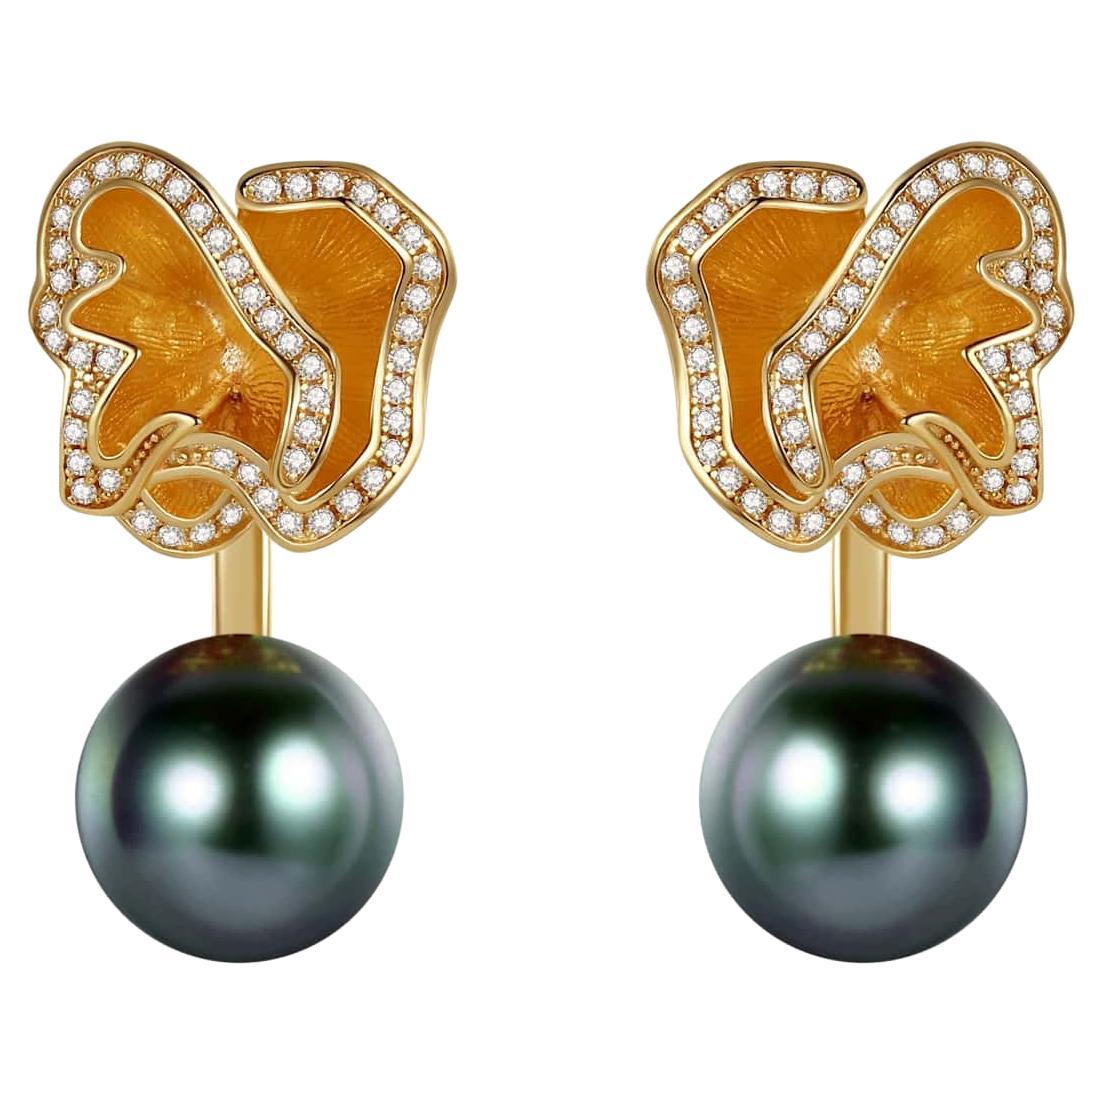 Quintessence Pearl with Flower Basket Earrings, Green